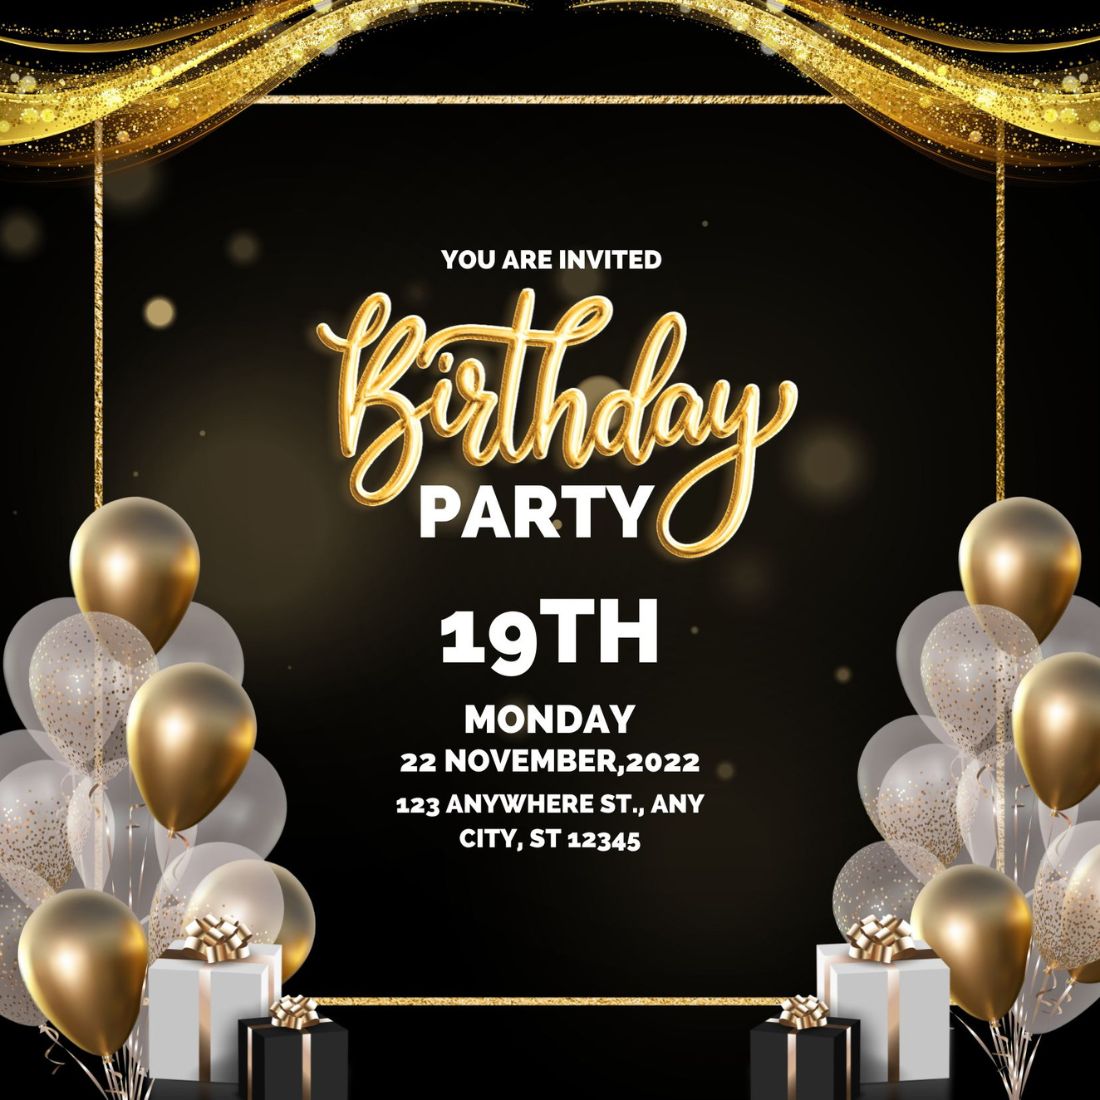 Personalize online this Abstract Colorful Birthday Party Invitation template